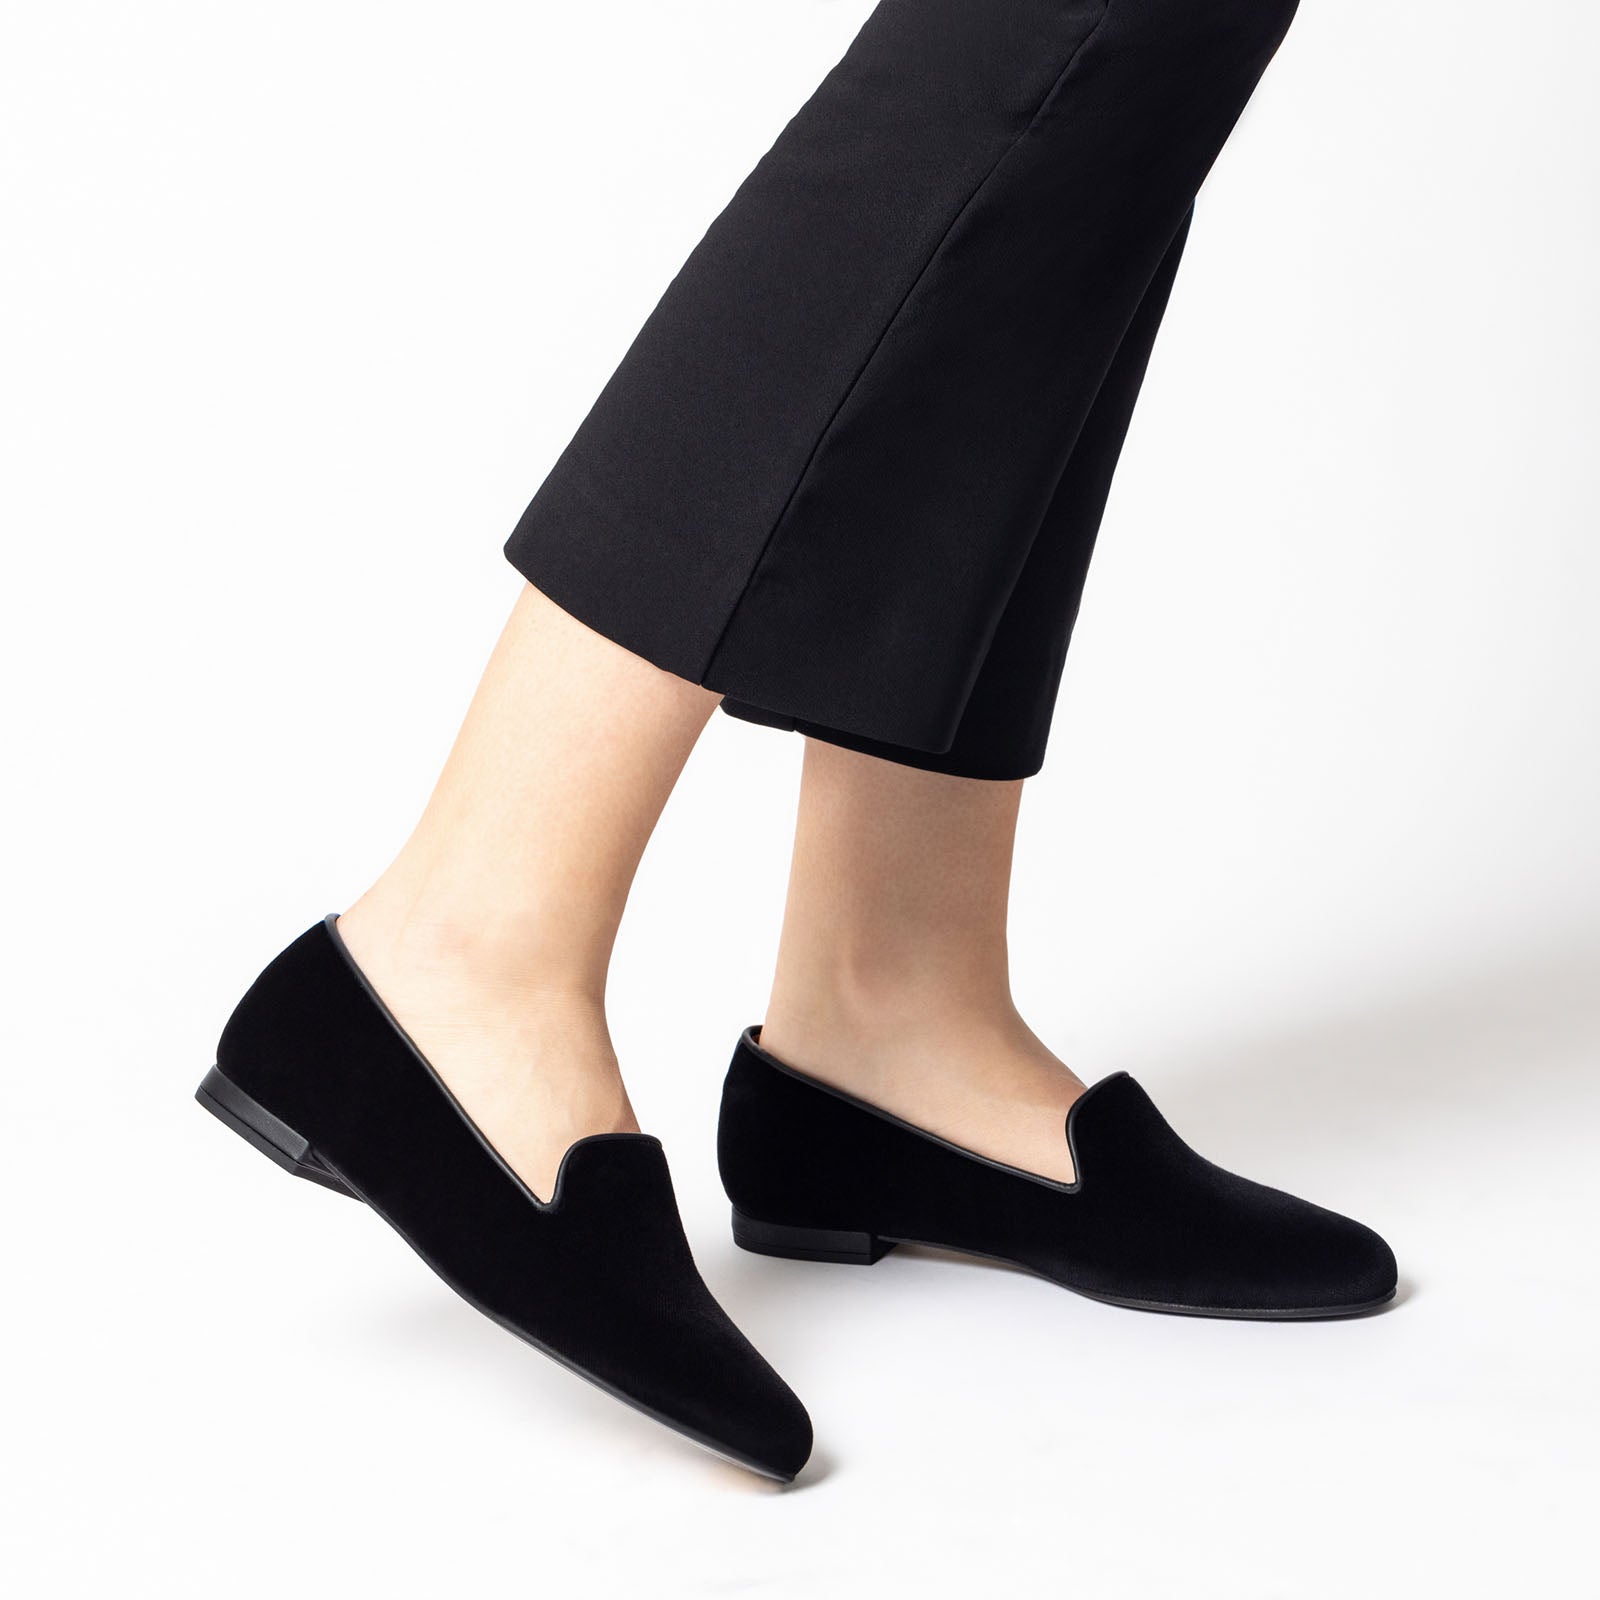 Women’s Flats, Pumps, Loafers and More | Jon Josef – Page 2